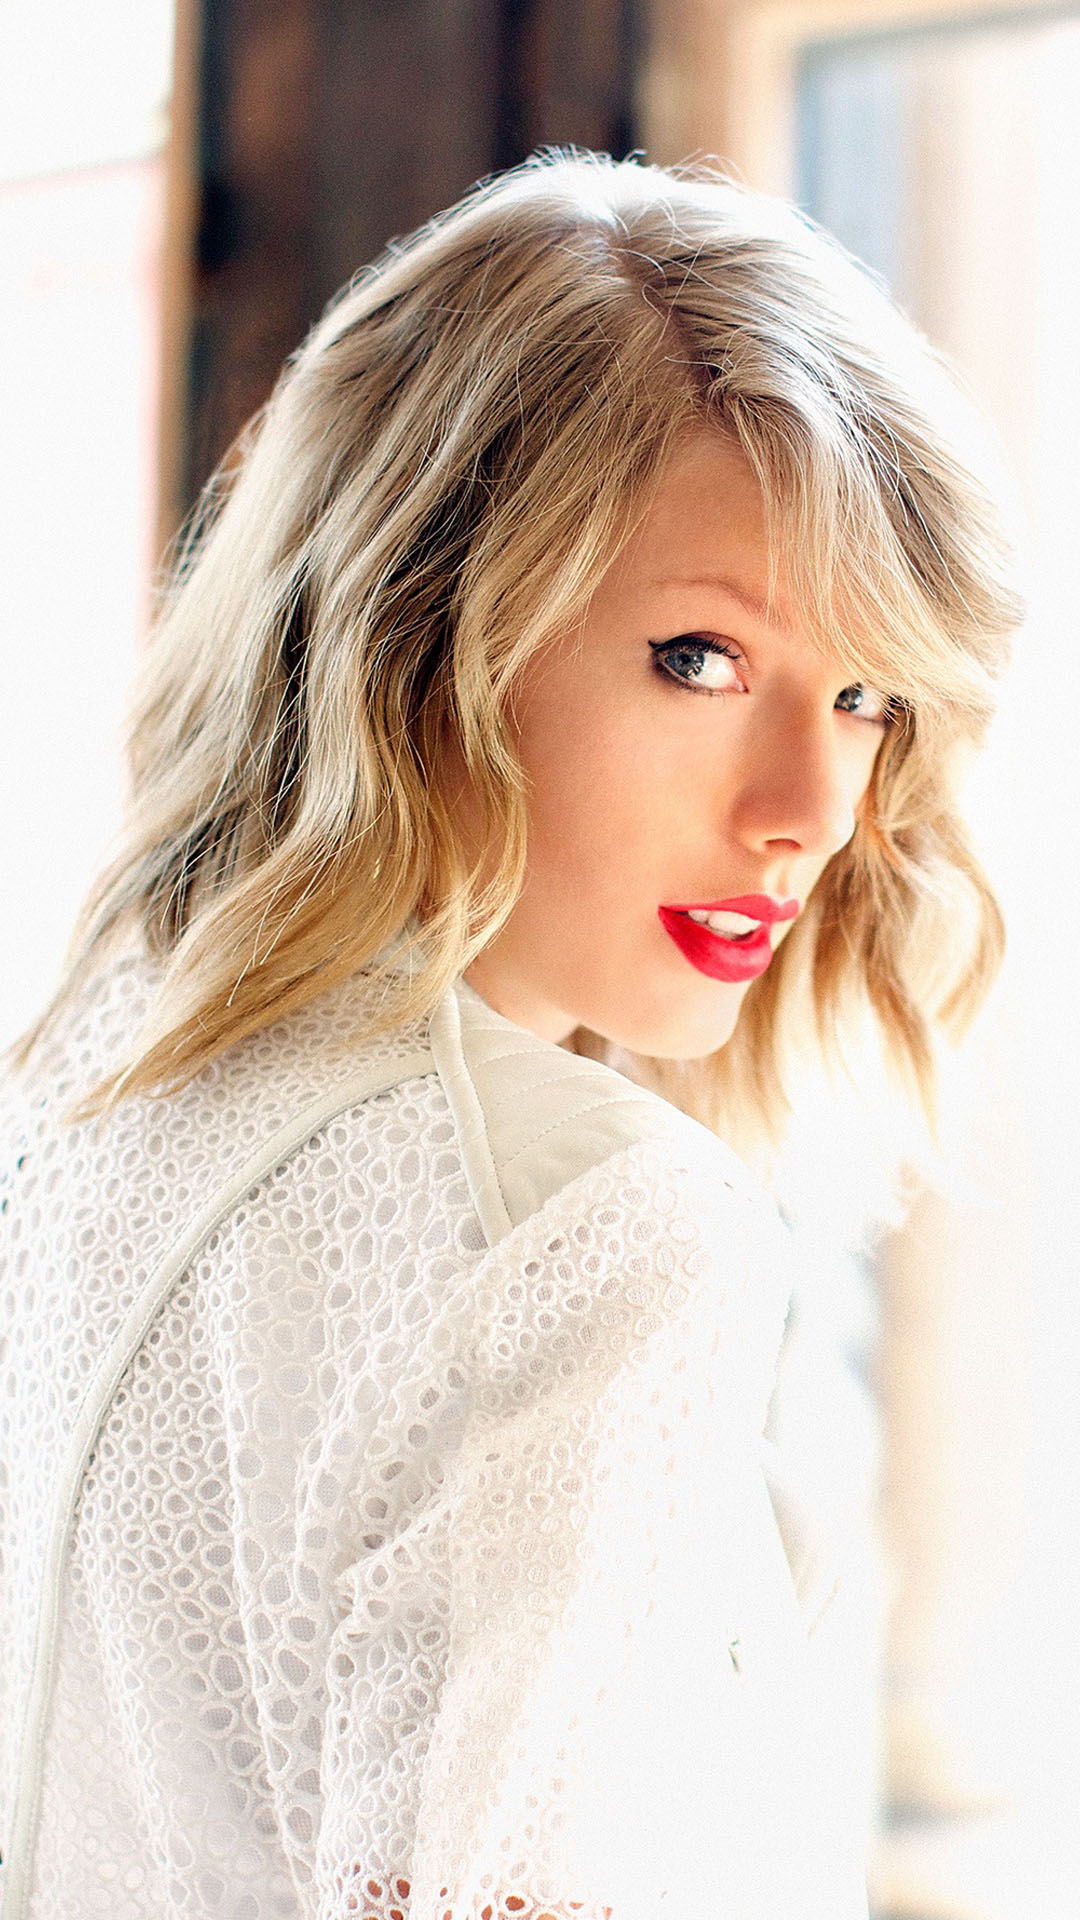 Taylor Swift Iphone Wallpaper Hair Blond Hairstyle Face Lip Wallpaperuse